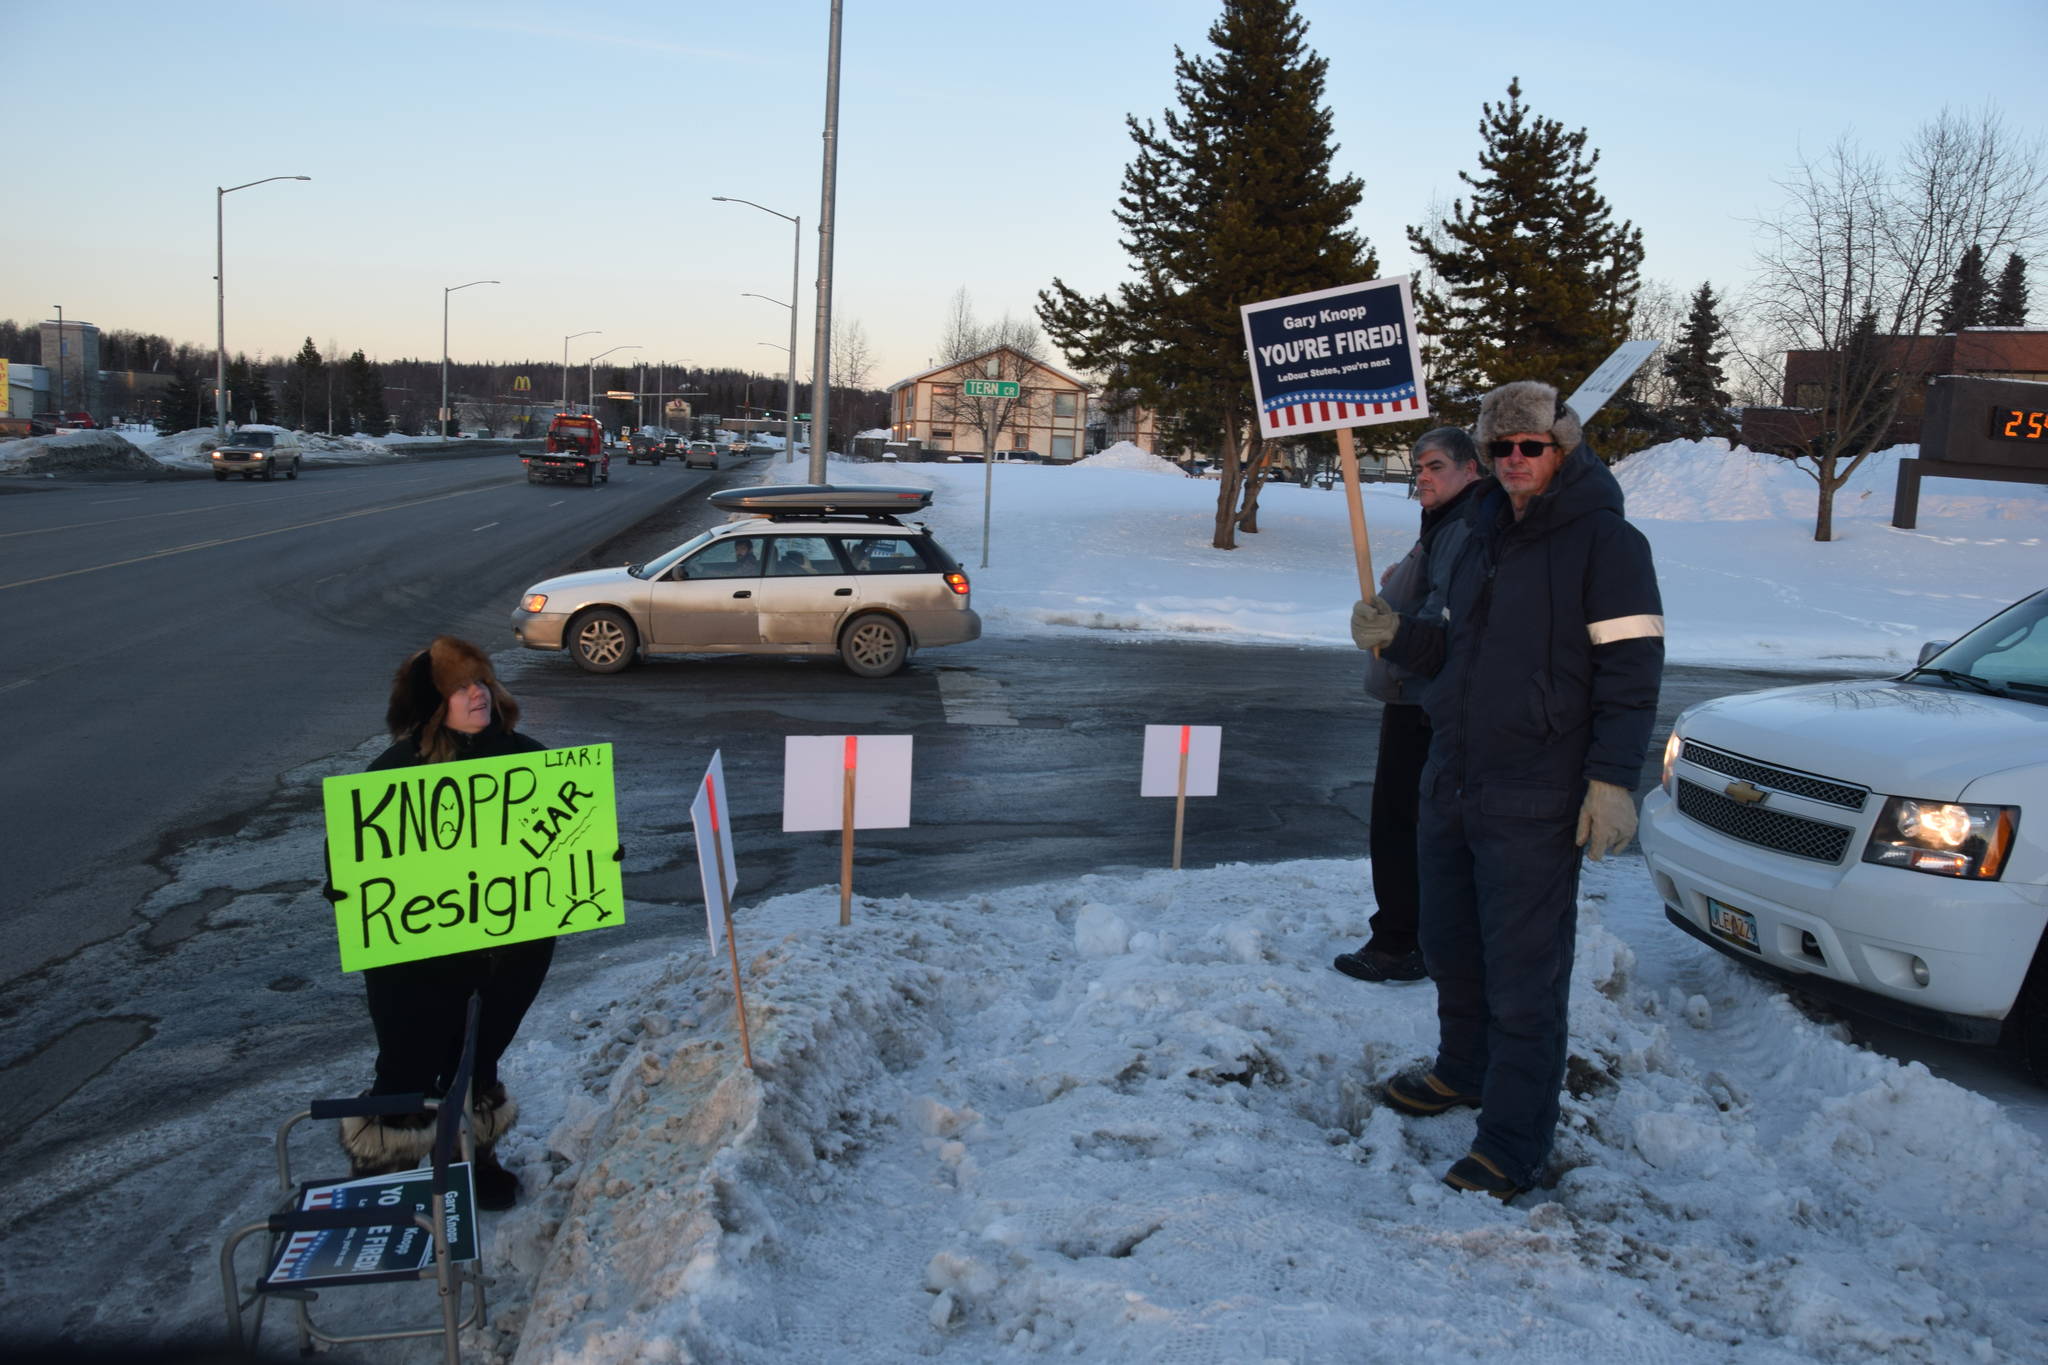 Protestors stand outside the town hall hosted by Rep. Gary Knopp, R- Soldotna at the Kenai River Suites in Soldotna on Feb. 15, 2019. (Photo by Brian Mazurek/Peninsula Clarion)